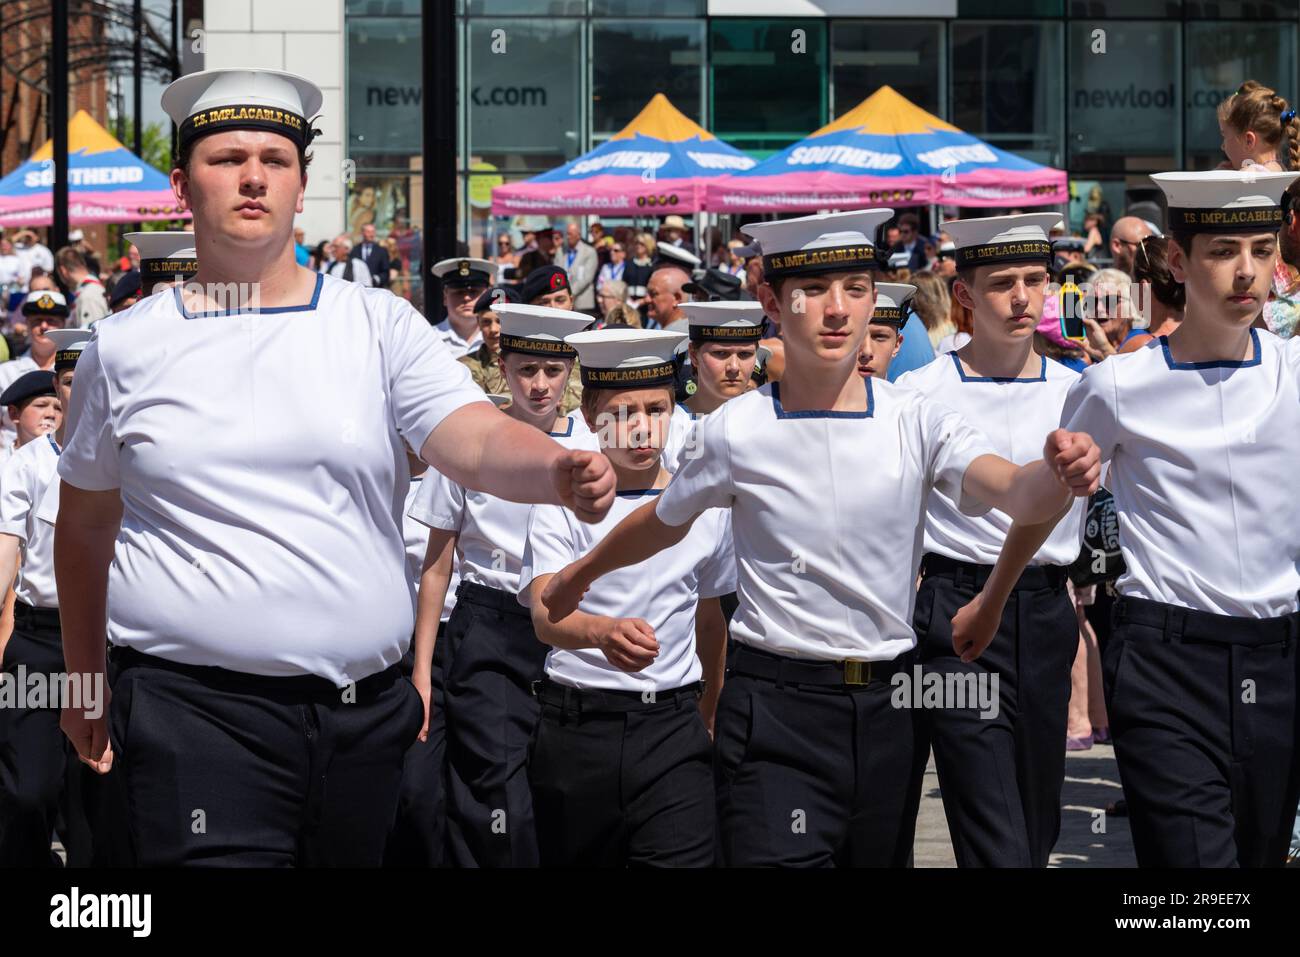 TS Implacable sea cadets at an Armed Forces Day event in the High Street, Southend on Sea, Essex, UK. Marching Stock Photo